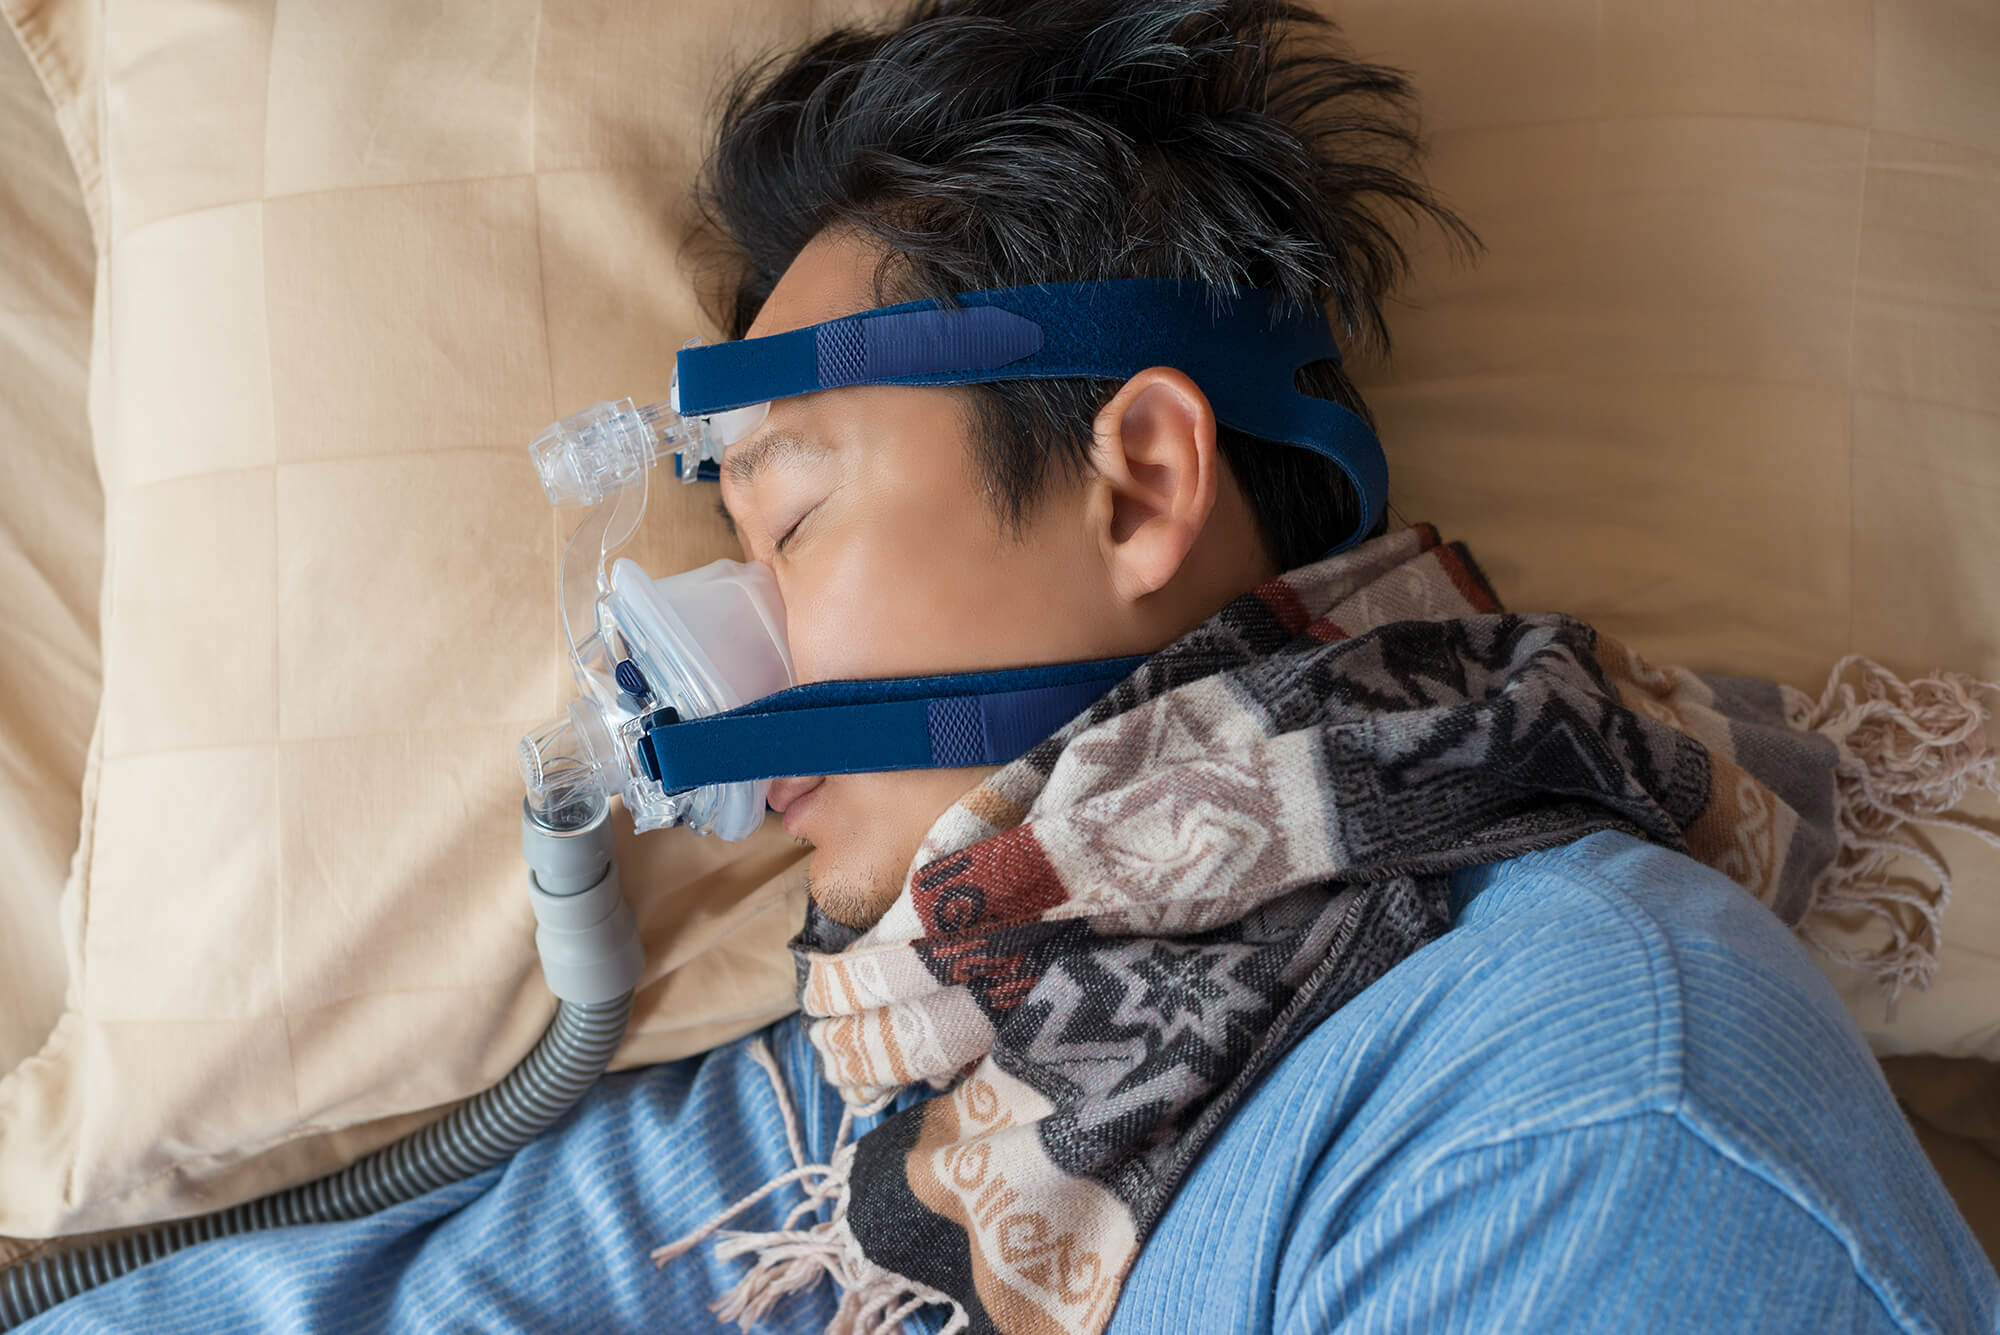 8 Things to Know About CPAP Masks Before You Buy One